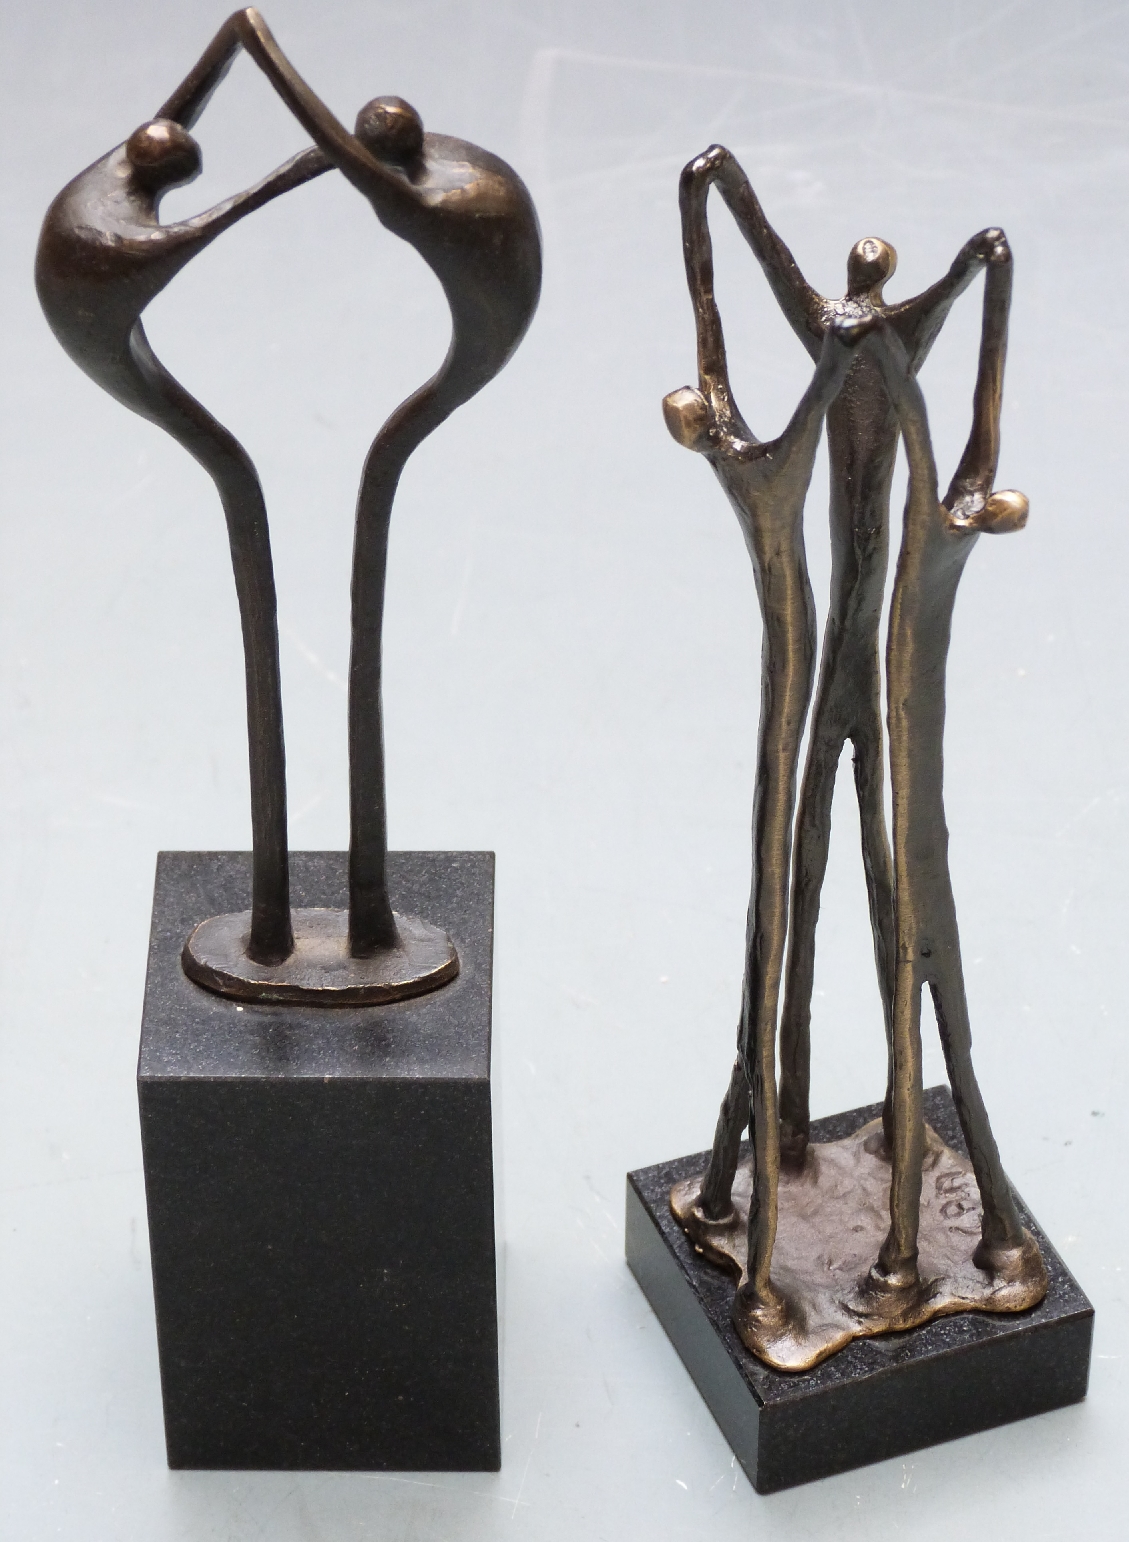 Two Artihove bronzes / bronze sculptures of people linking arms with maker's label to base, one